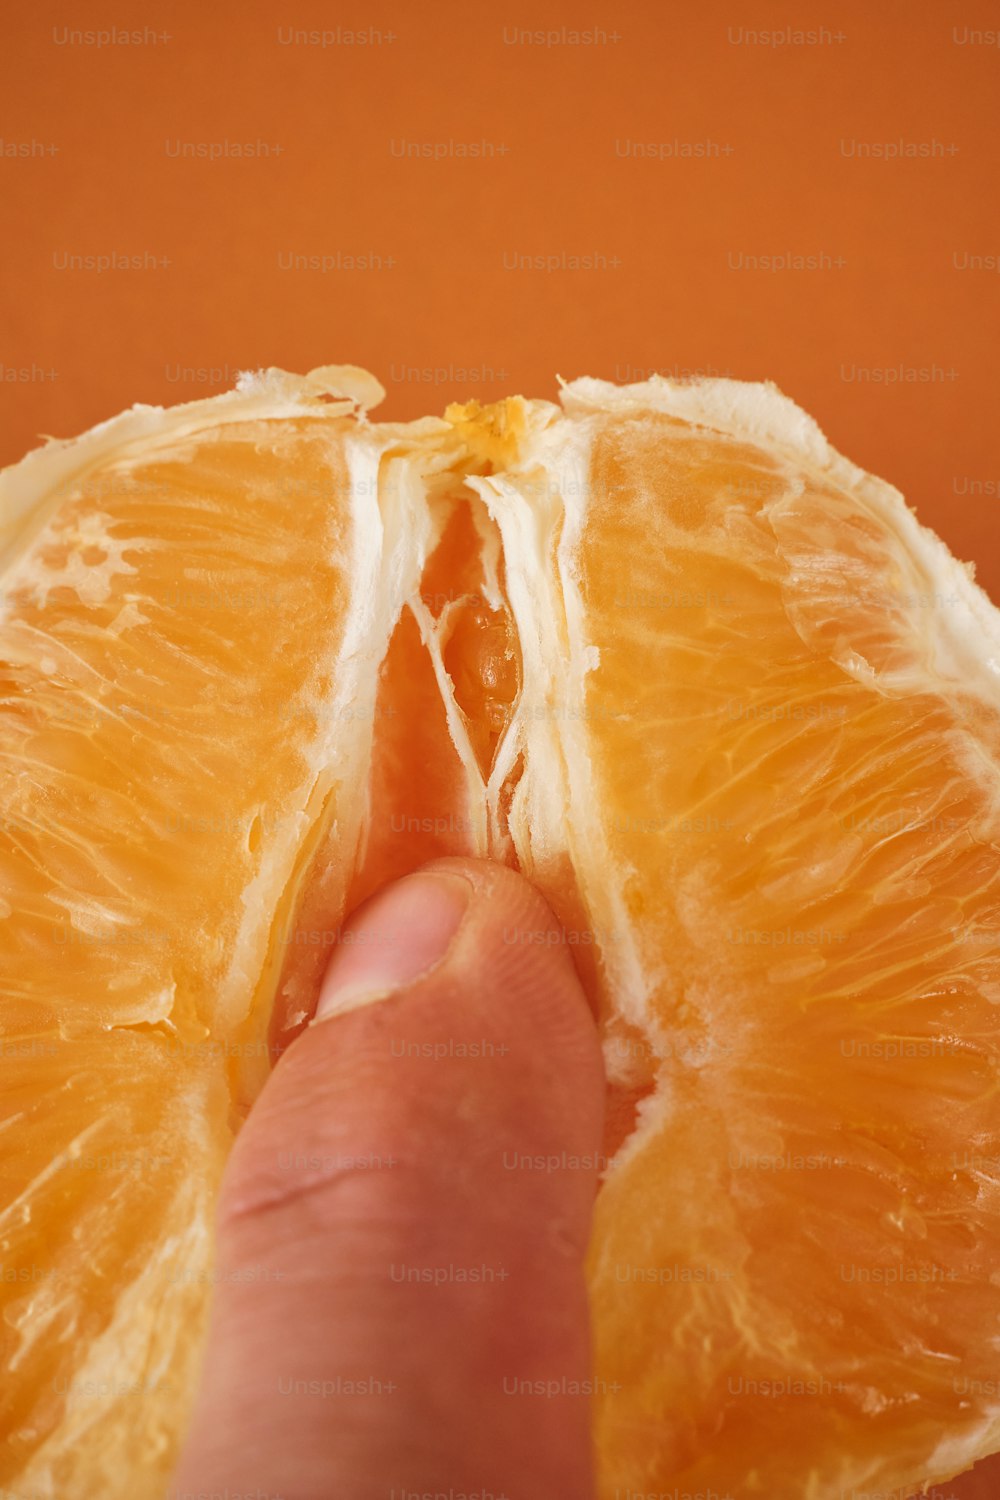 a hand is holding an orange that has been cut in half